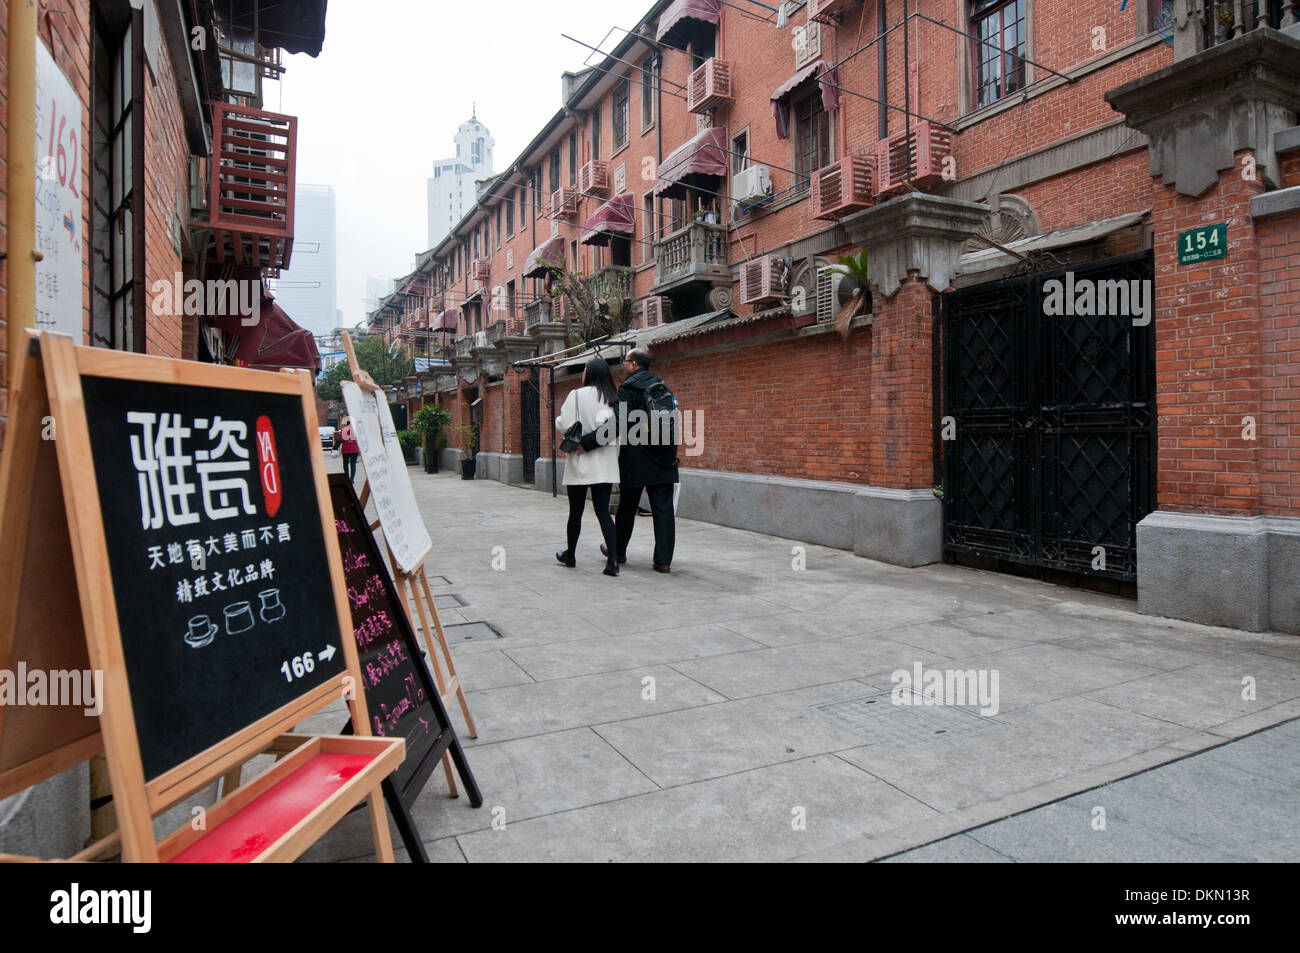 traditional Shanghainese architectural style area - Shikumen - combine of Western and Chinese elements, Shanghai, China Stock Photo